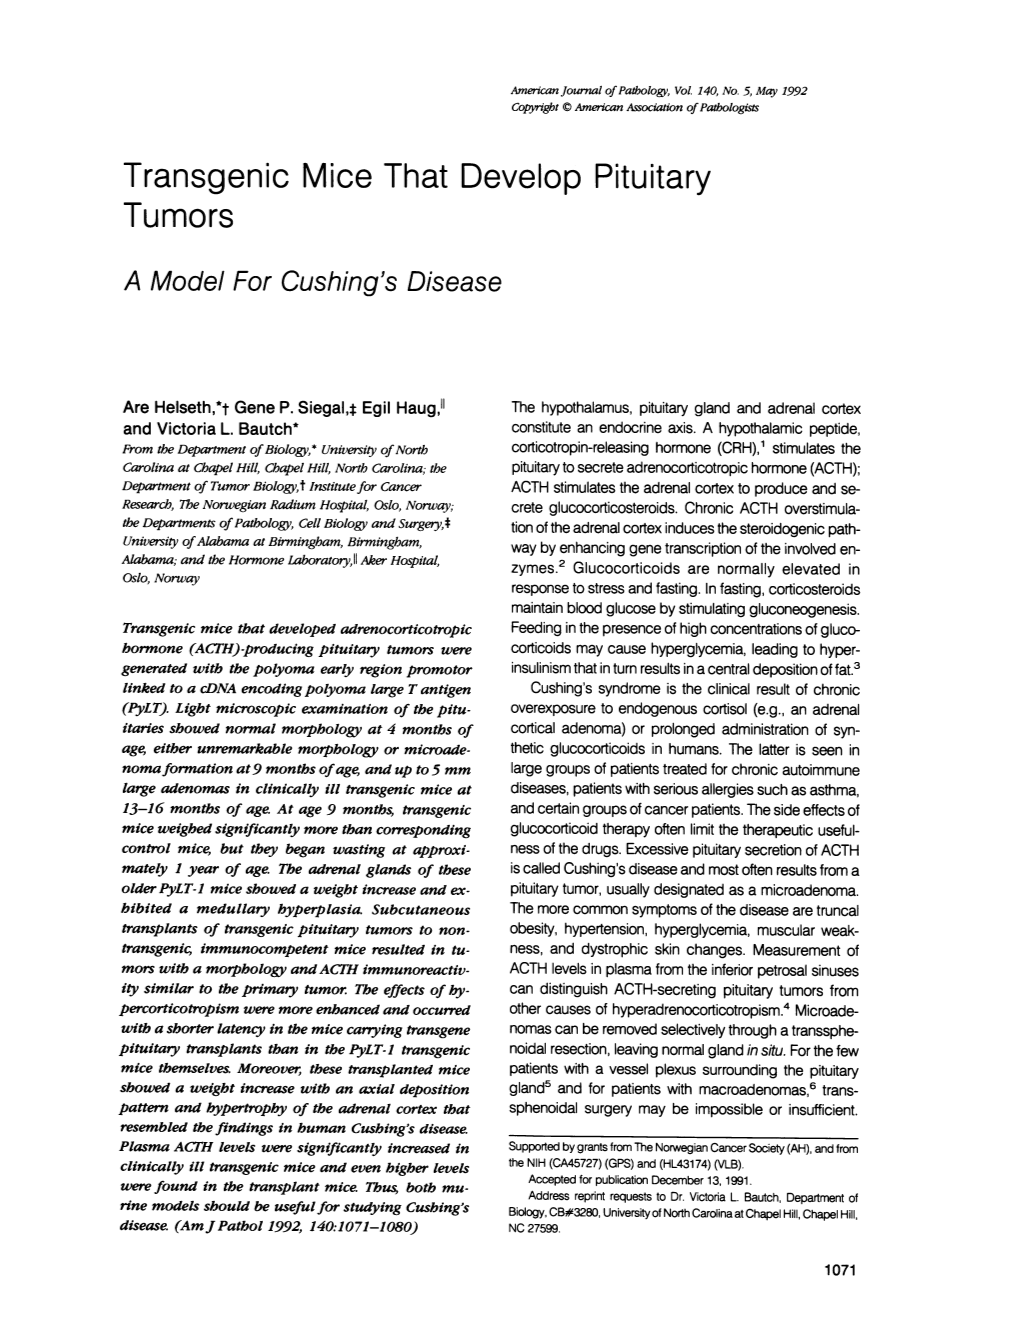 Transgenic Mice That Develop Pituitary Tumors a Model for Cushing's Disease